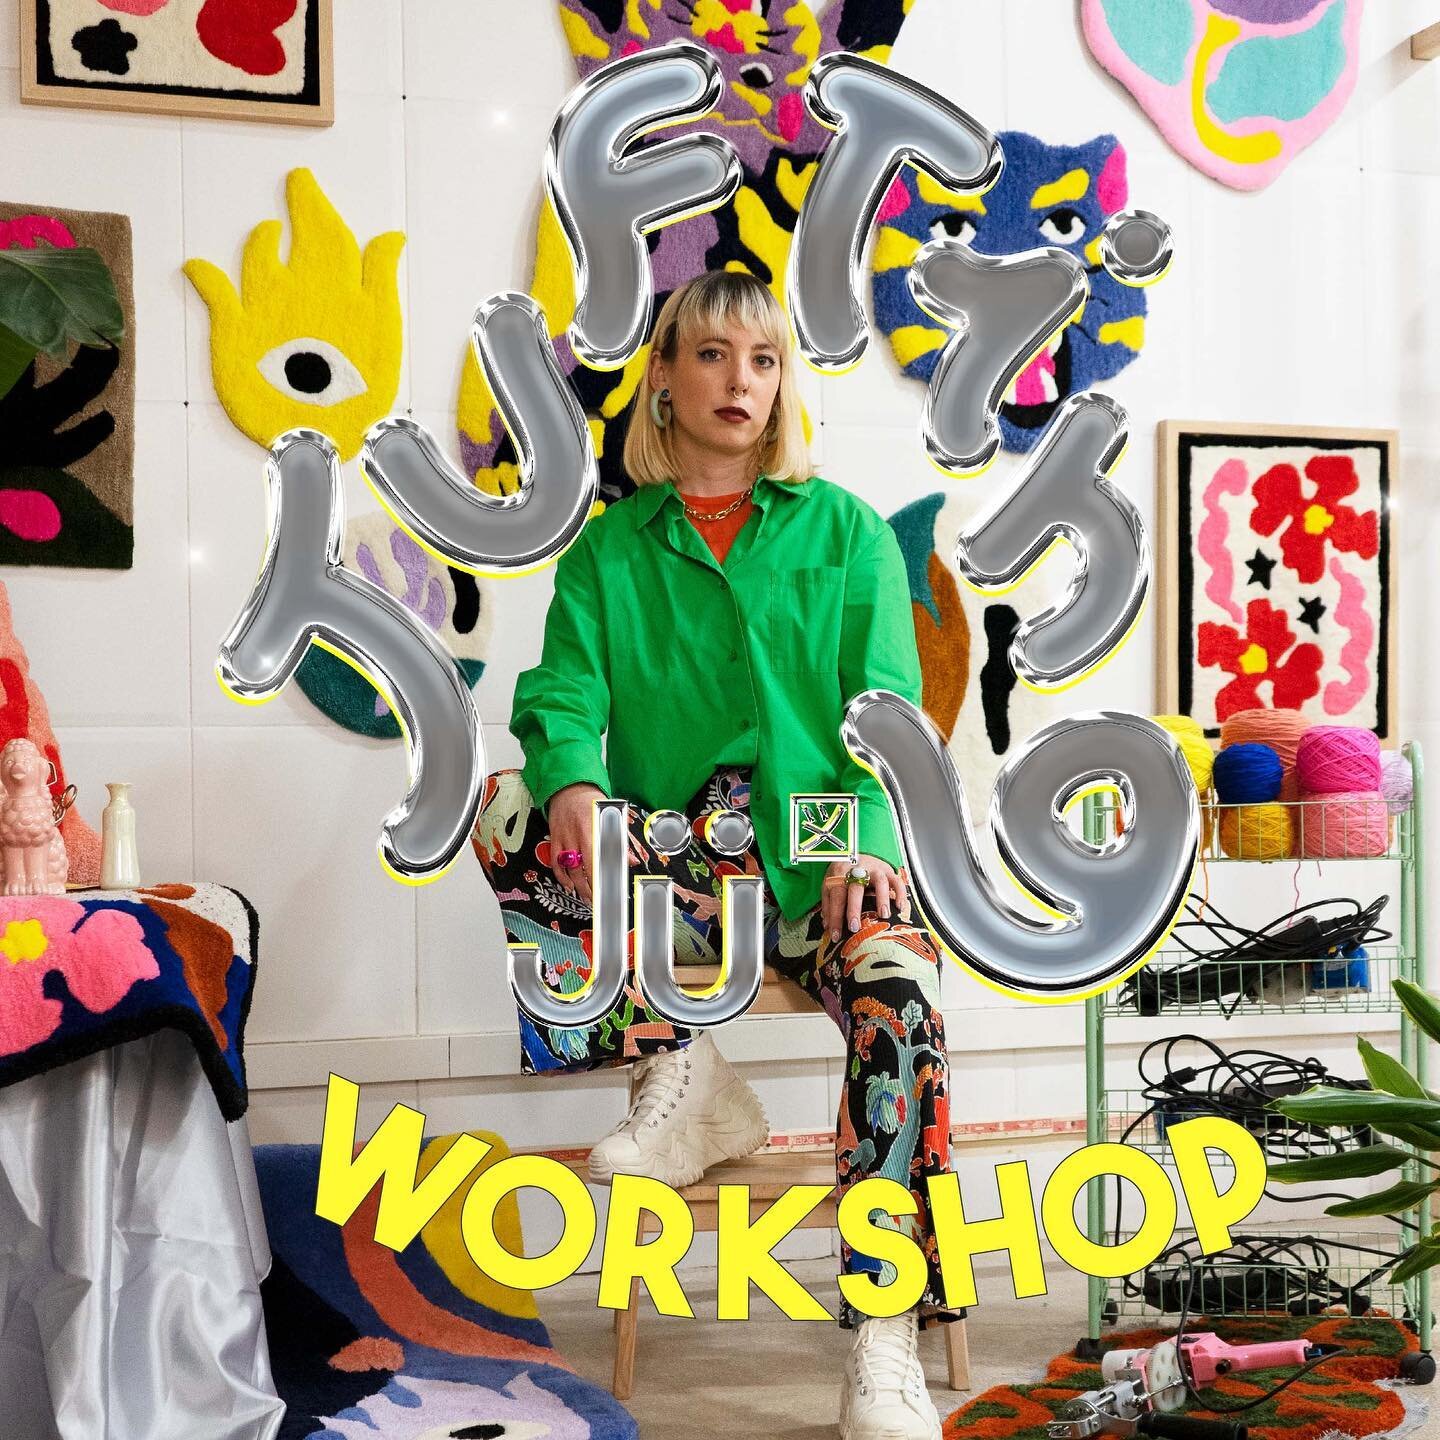 J&Uuml; Tufting Workshops are finally coming to Luxembourg ! 💥💥
&bull;When? 2nd + 3rd of June 
👉🏻Save the date 📆❤️
&bull;Where? At @kulturfabrik_esch 
&bull;Tickets🎟️ : check my link in bio! 
Make your ✨own tufted rug✨
☻ choose your design or p